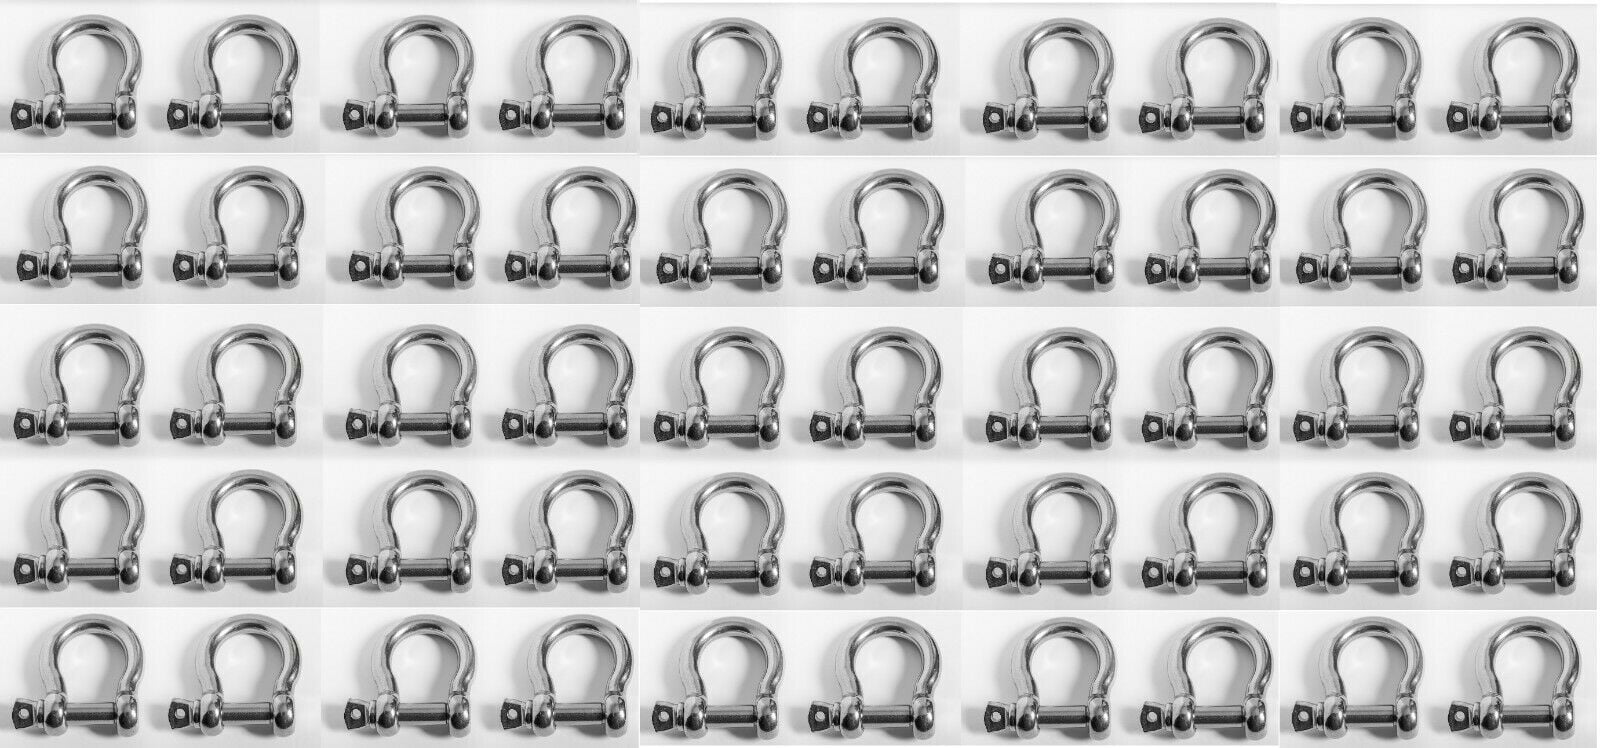 100x 5mm 3/16" Marine Bow Shackle Clevis DRing 316 Stainless Steel Boat Rigging 